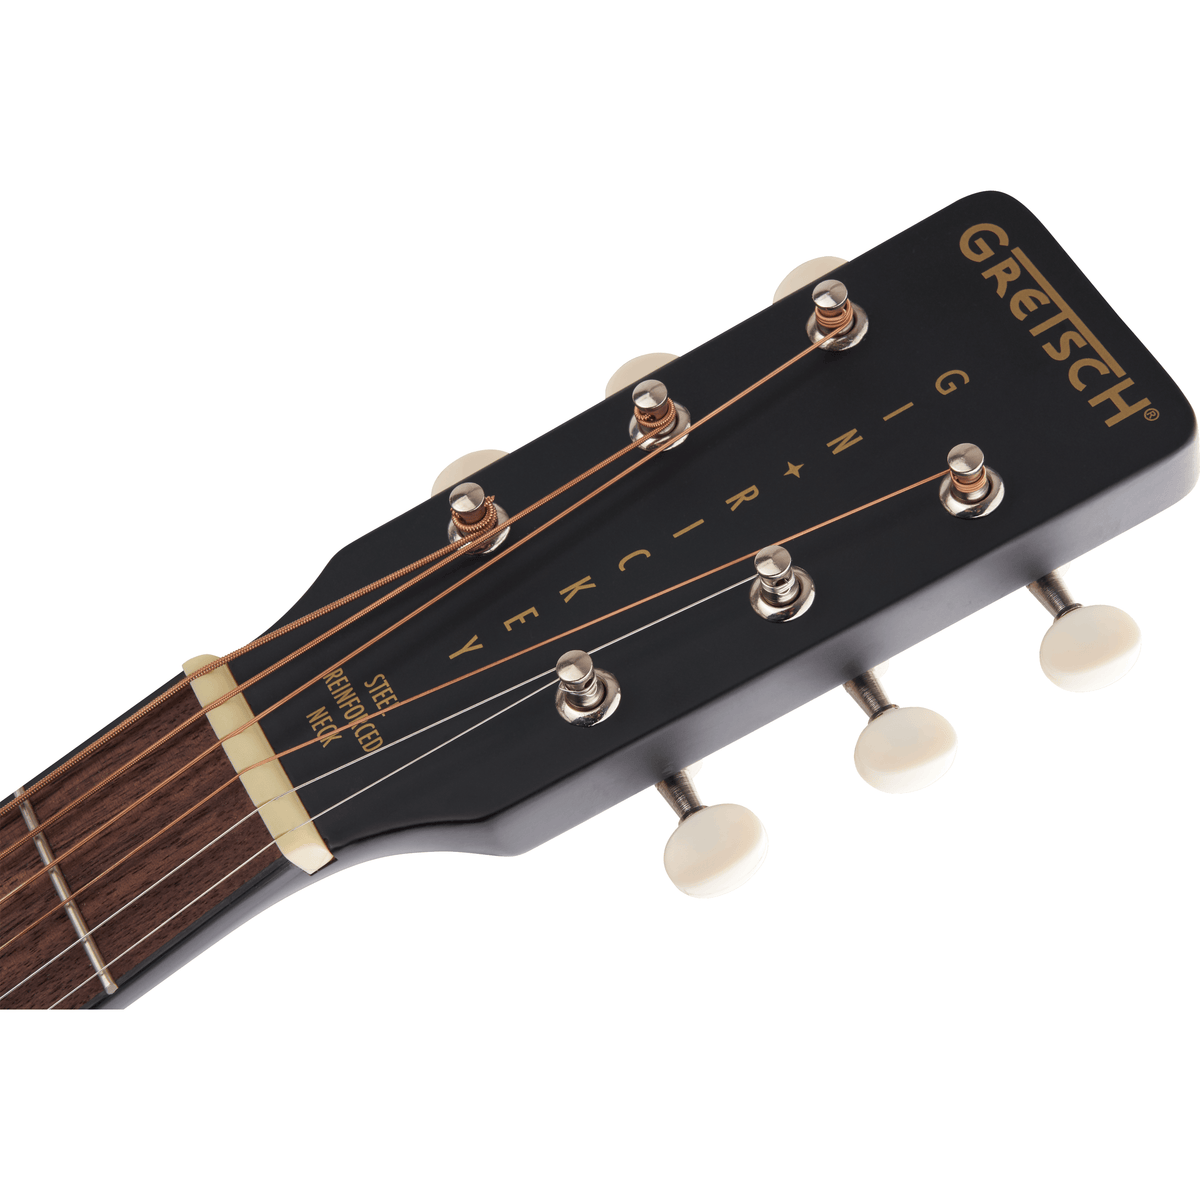 Gretsch Guitar Gretsch G9520E Gin Rickey Acoustic/Electric Parlor Guitar with Soundhole Pickup - Byron Music